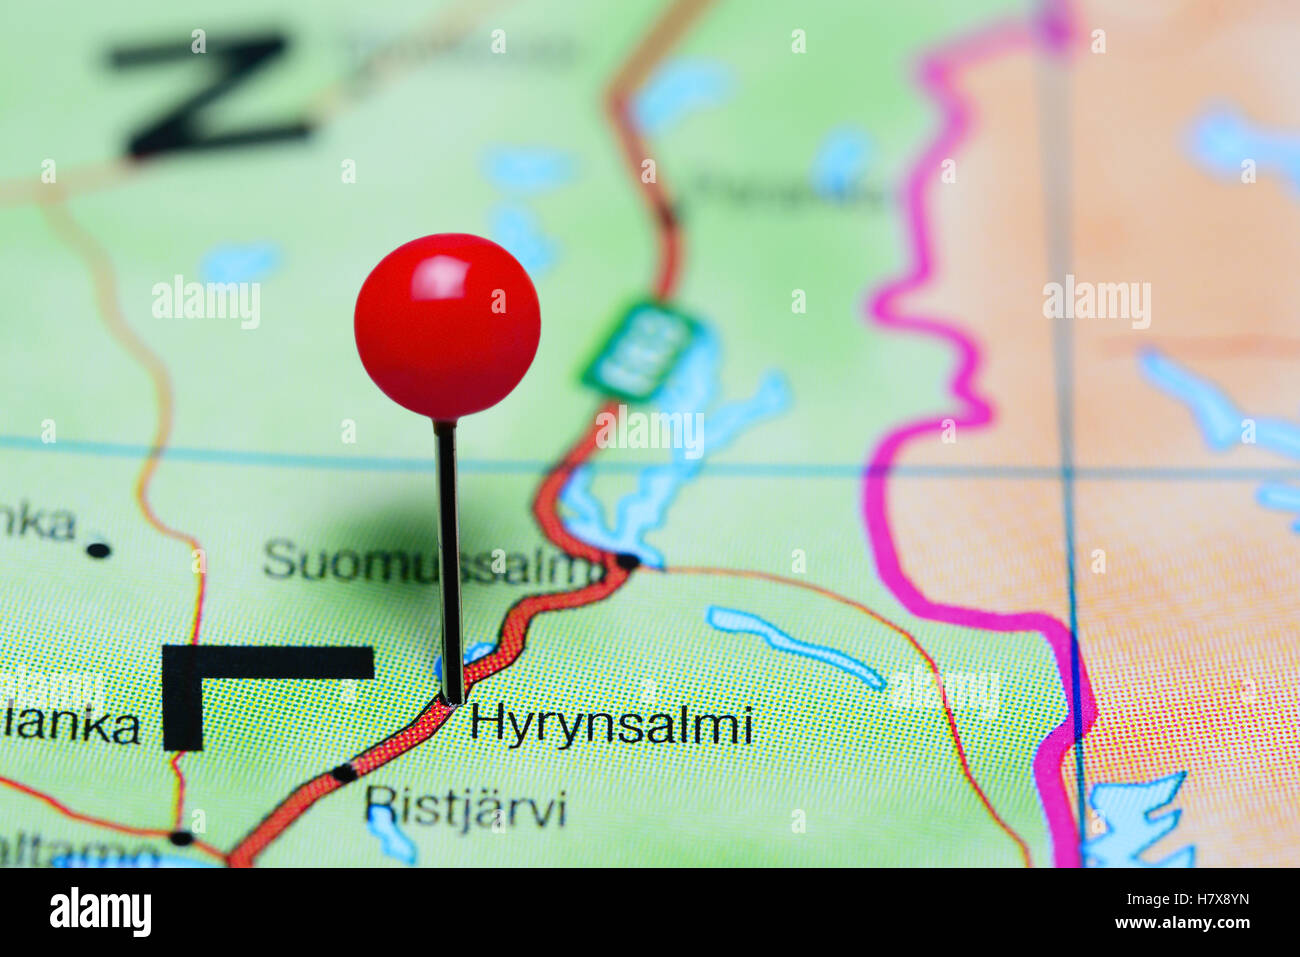 Hyrynsalmi pinned on a map of Finland Stock Photo